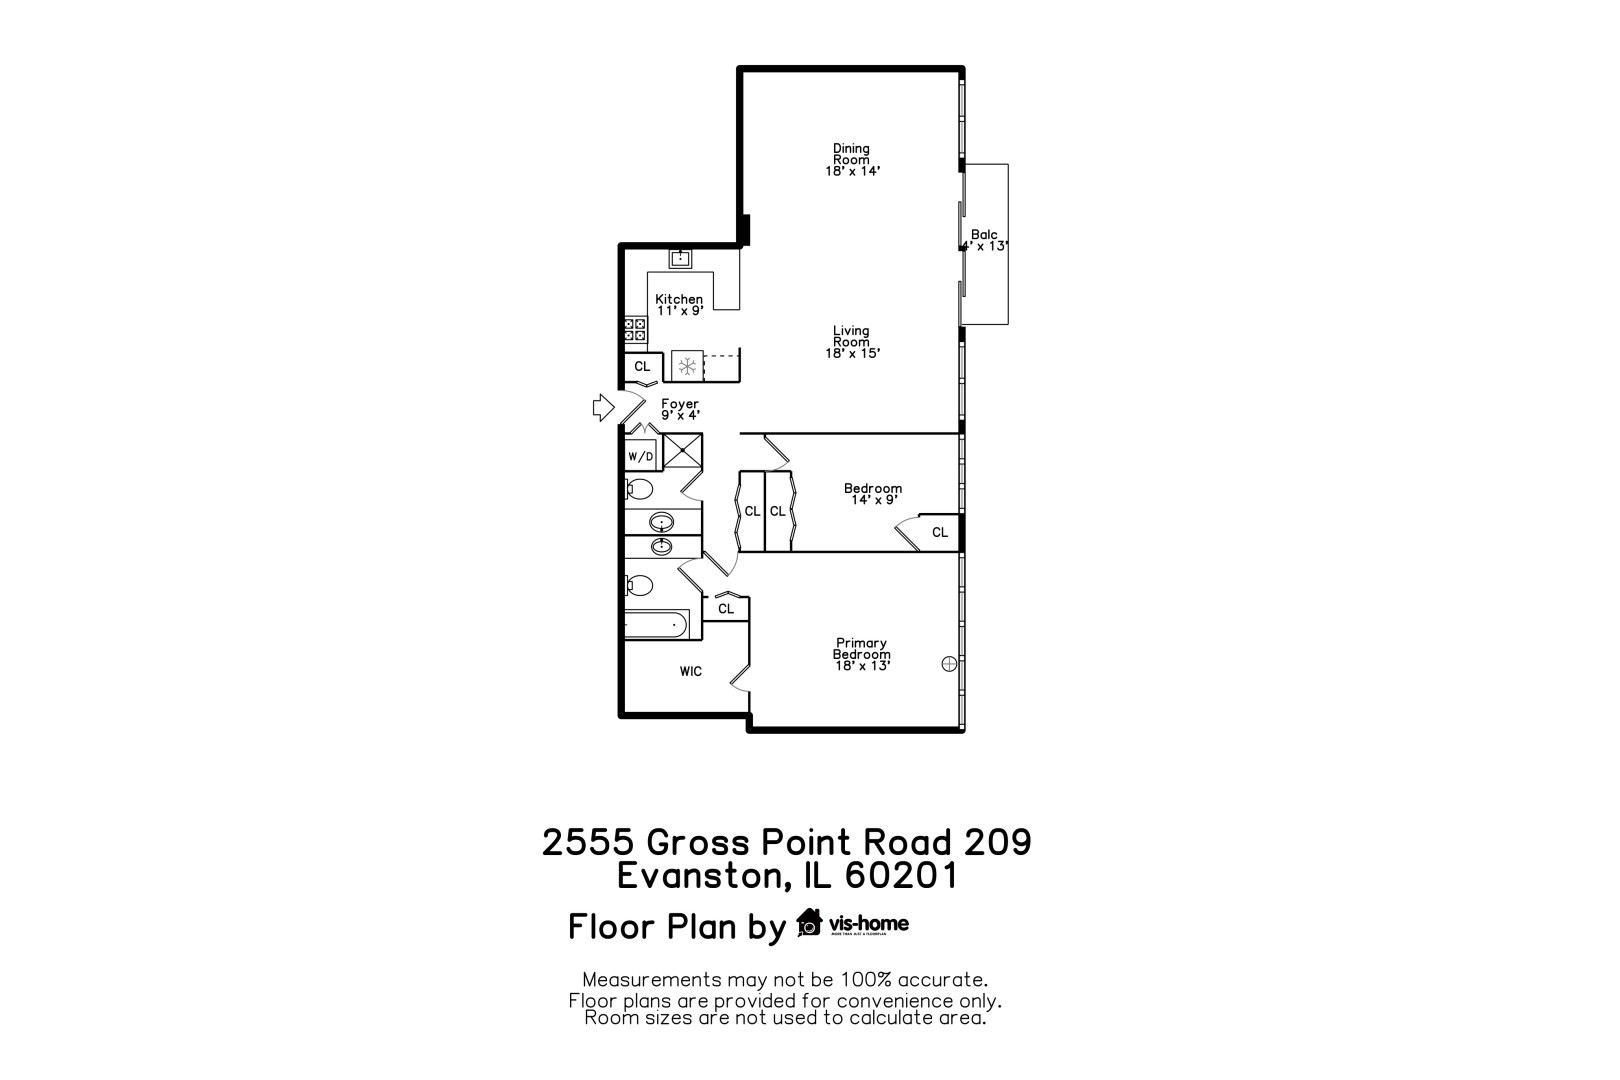 21. 2555 Gross Point Road